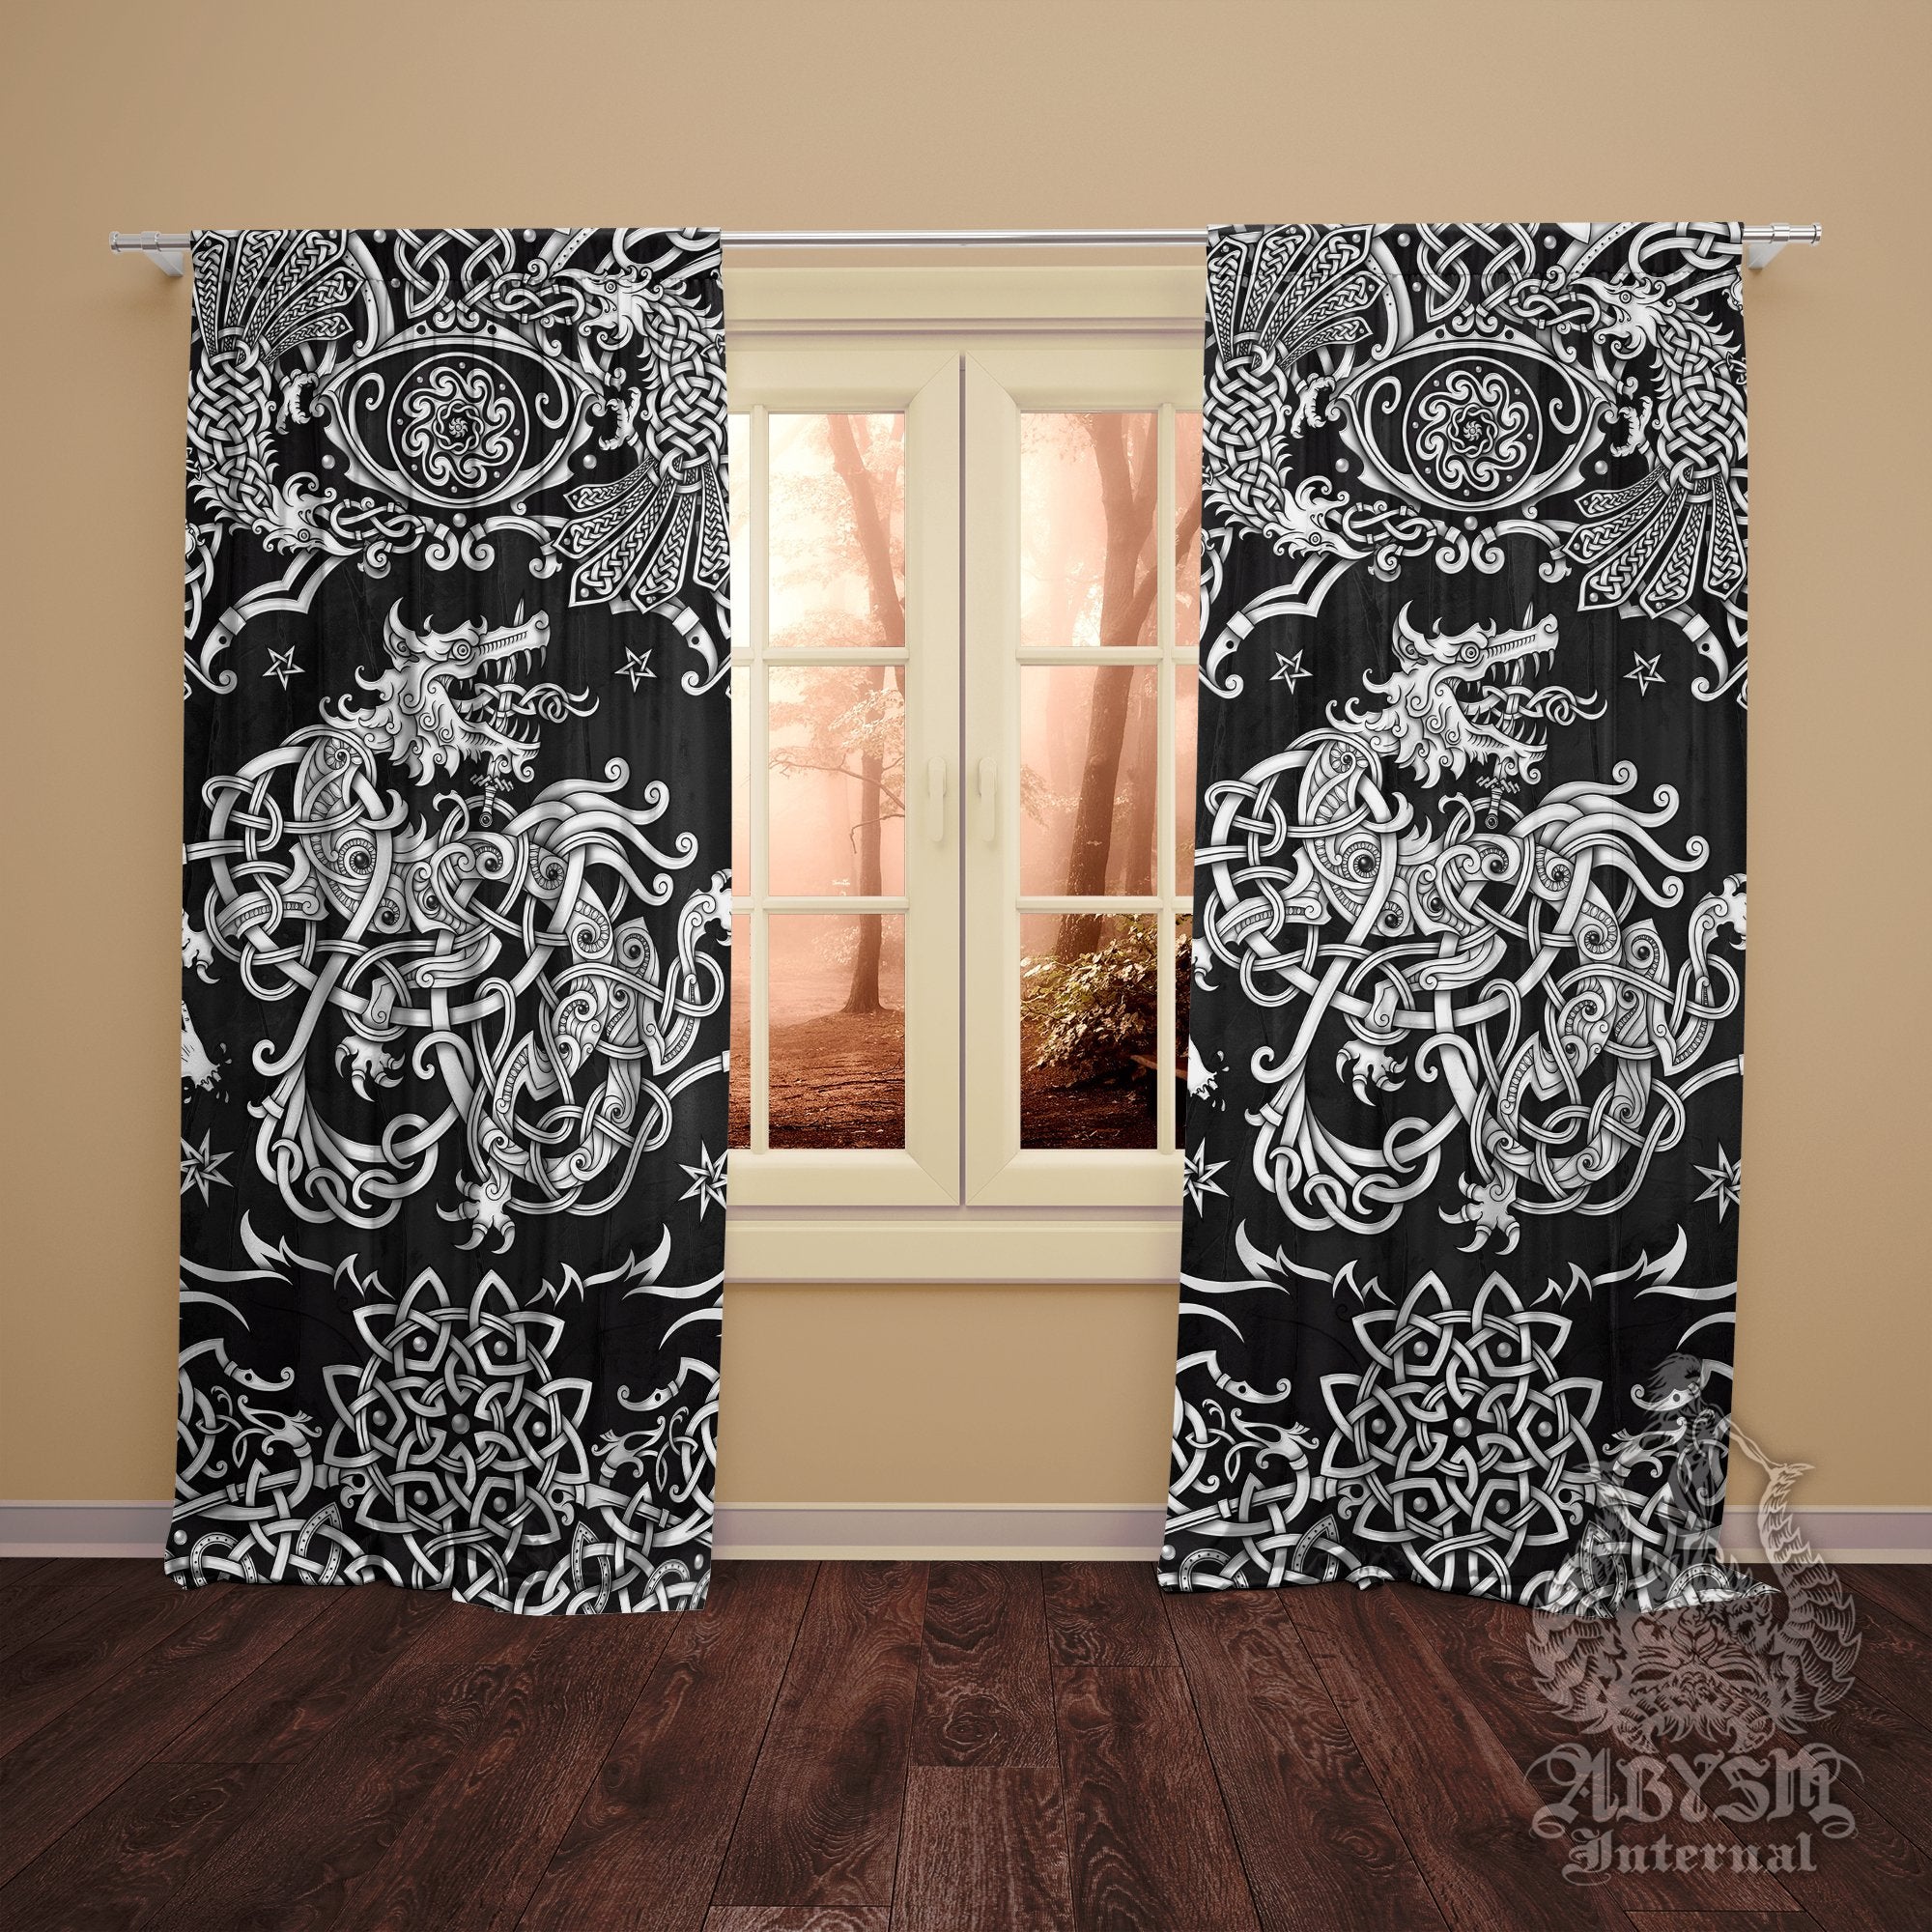 Fenrir Curtains, 50x84' Printed Window Panels, Old Norse Room Decor, Viking Wolf Art Print - White and 3 Colors - Abysm Internal